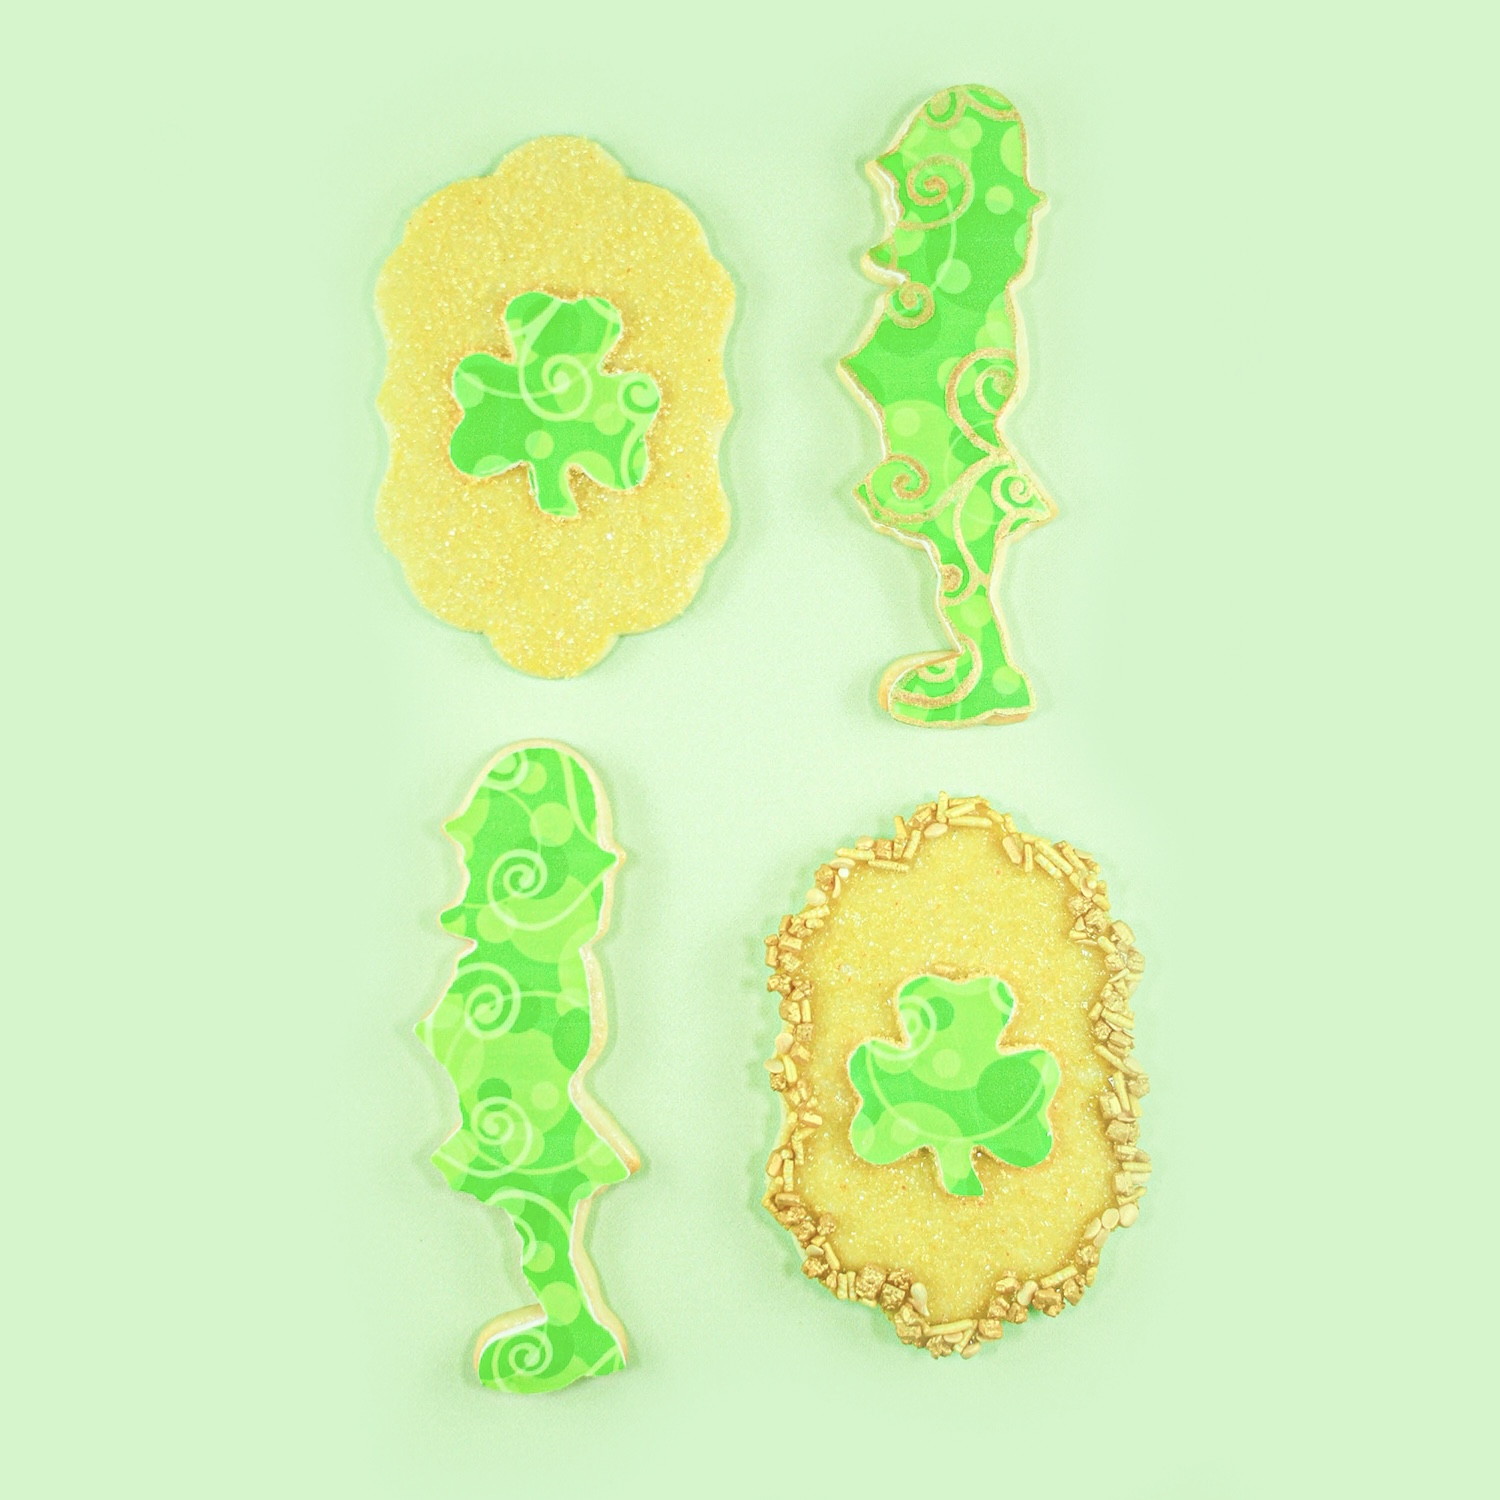 St. Patricks Day Edible Image Cookies of a Leprechan and a shamrock plaque cookie.